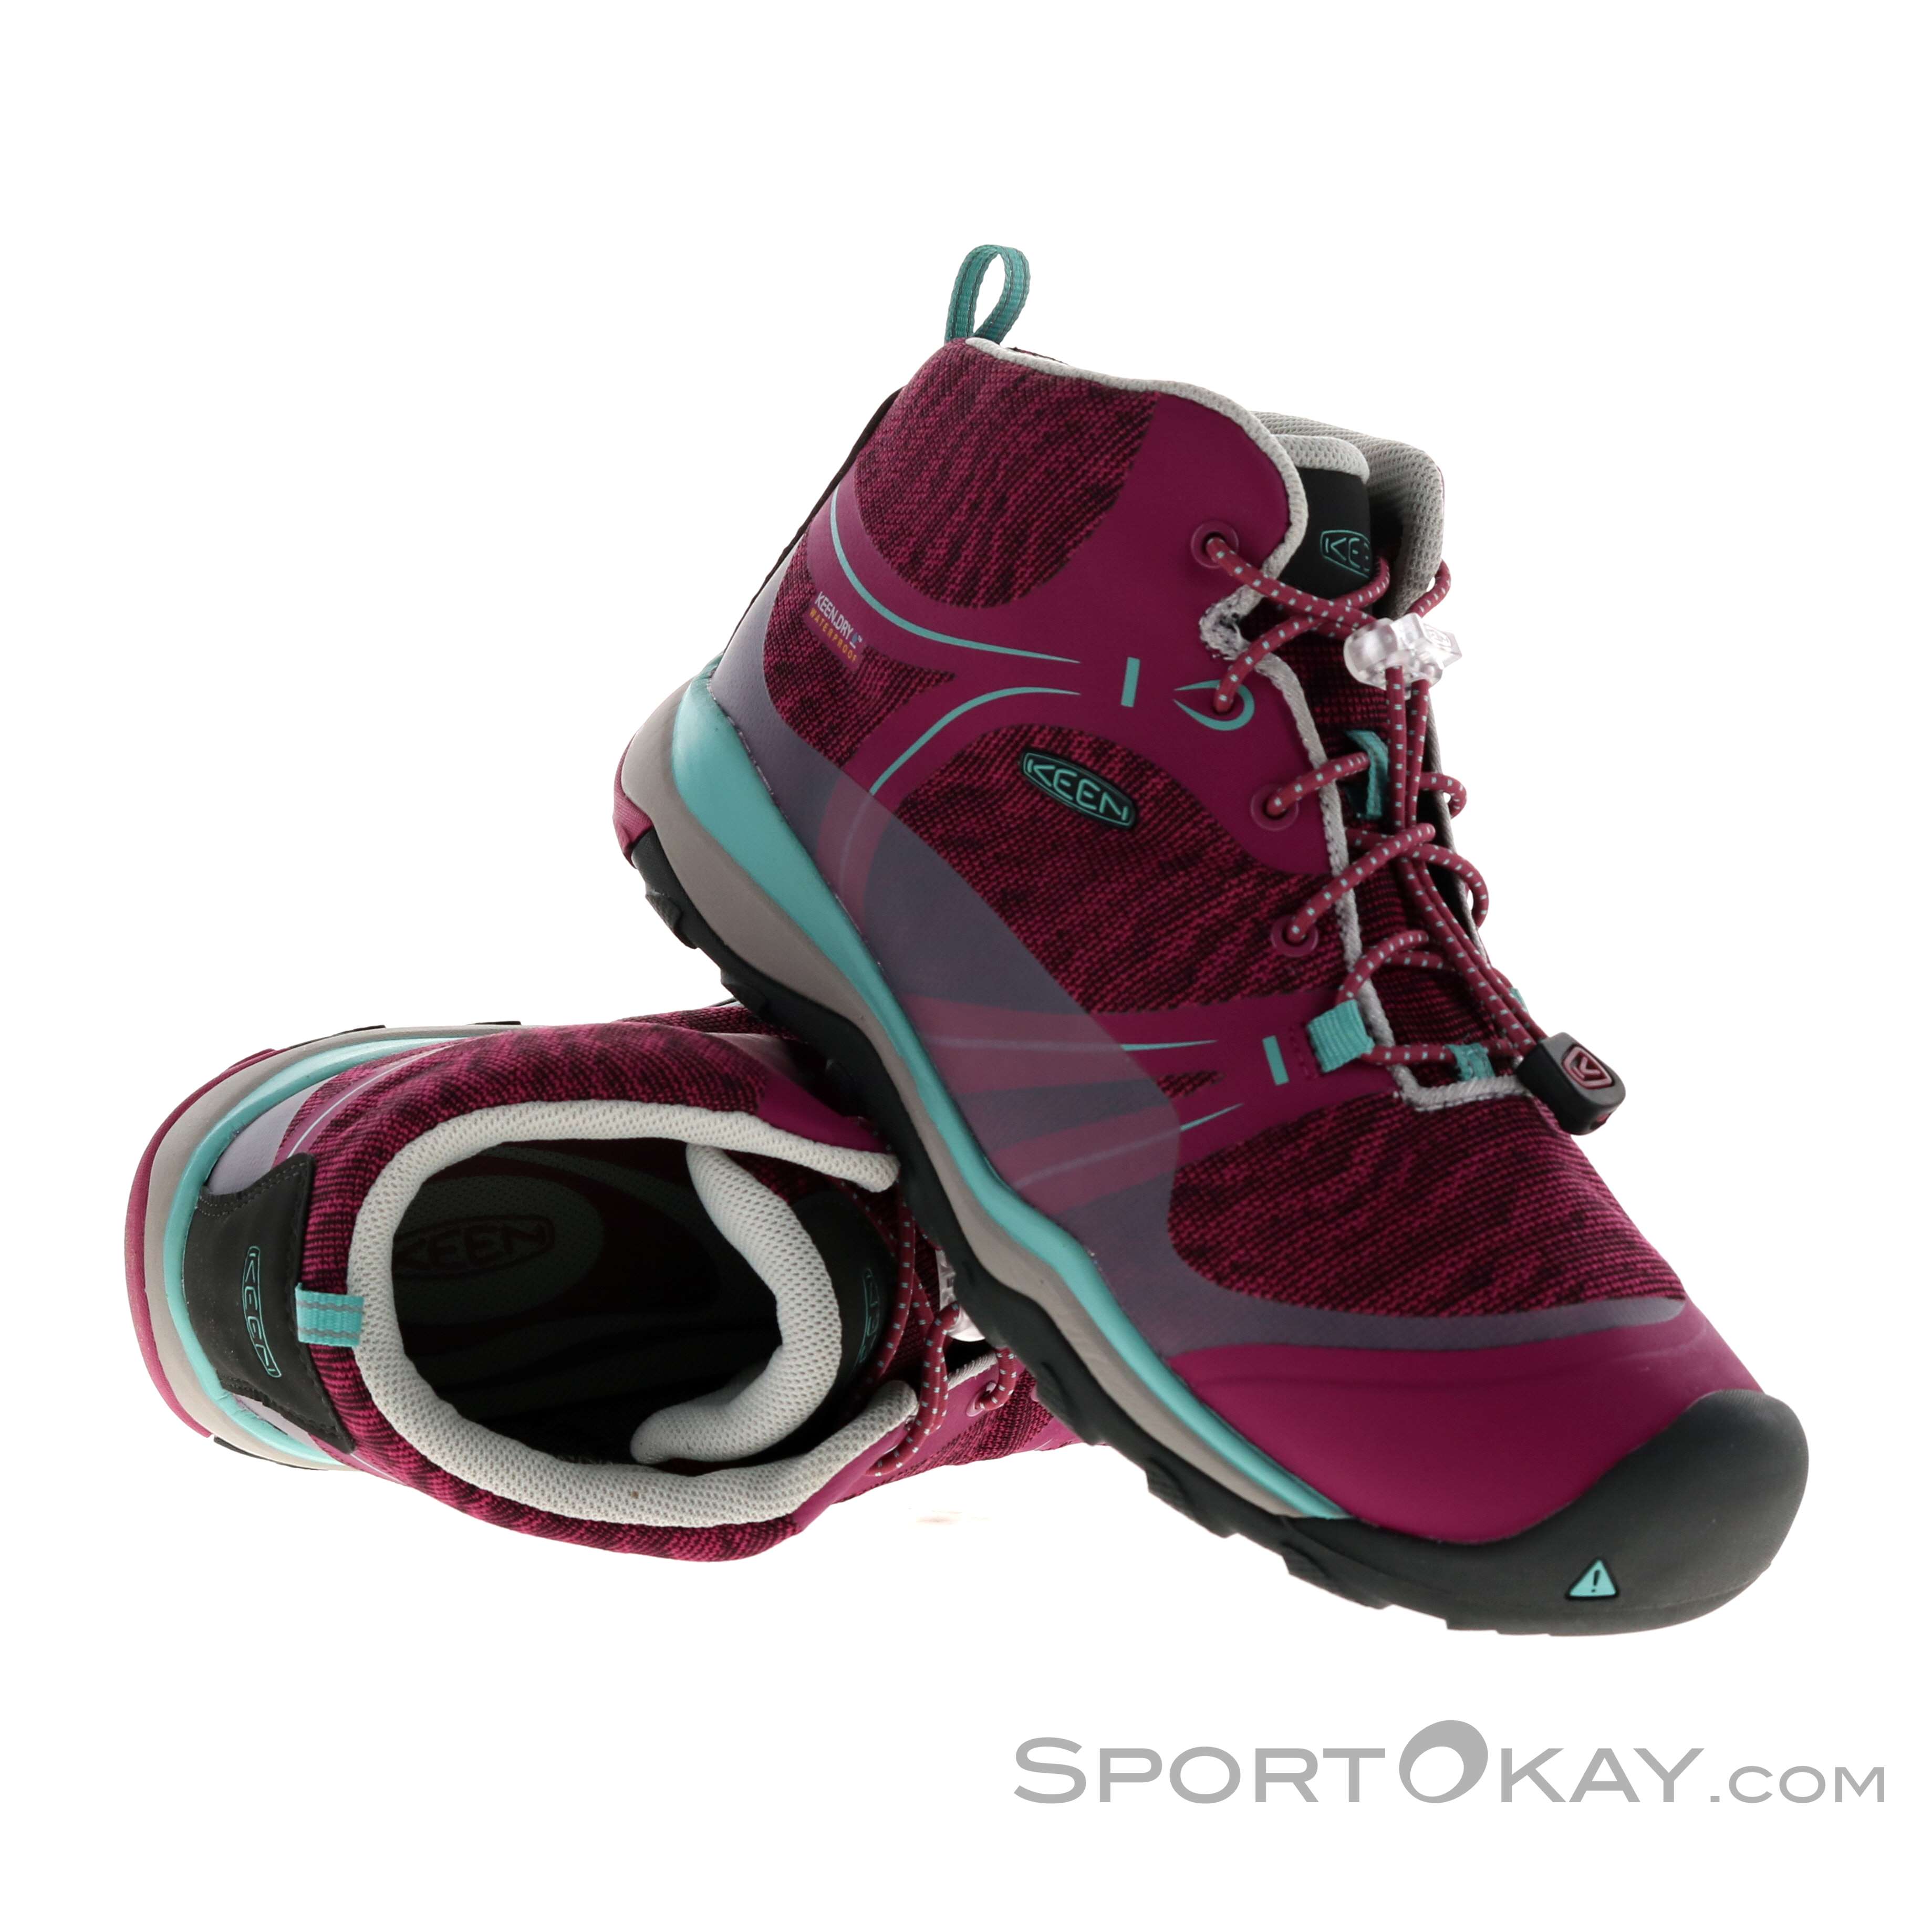 Buy > keen pink hiking boots > in stock